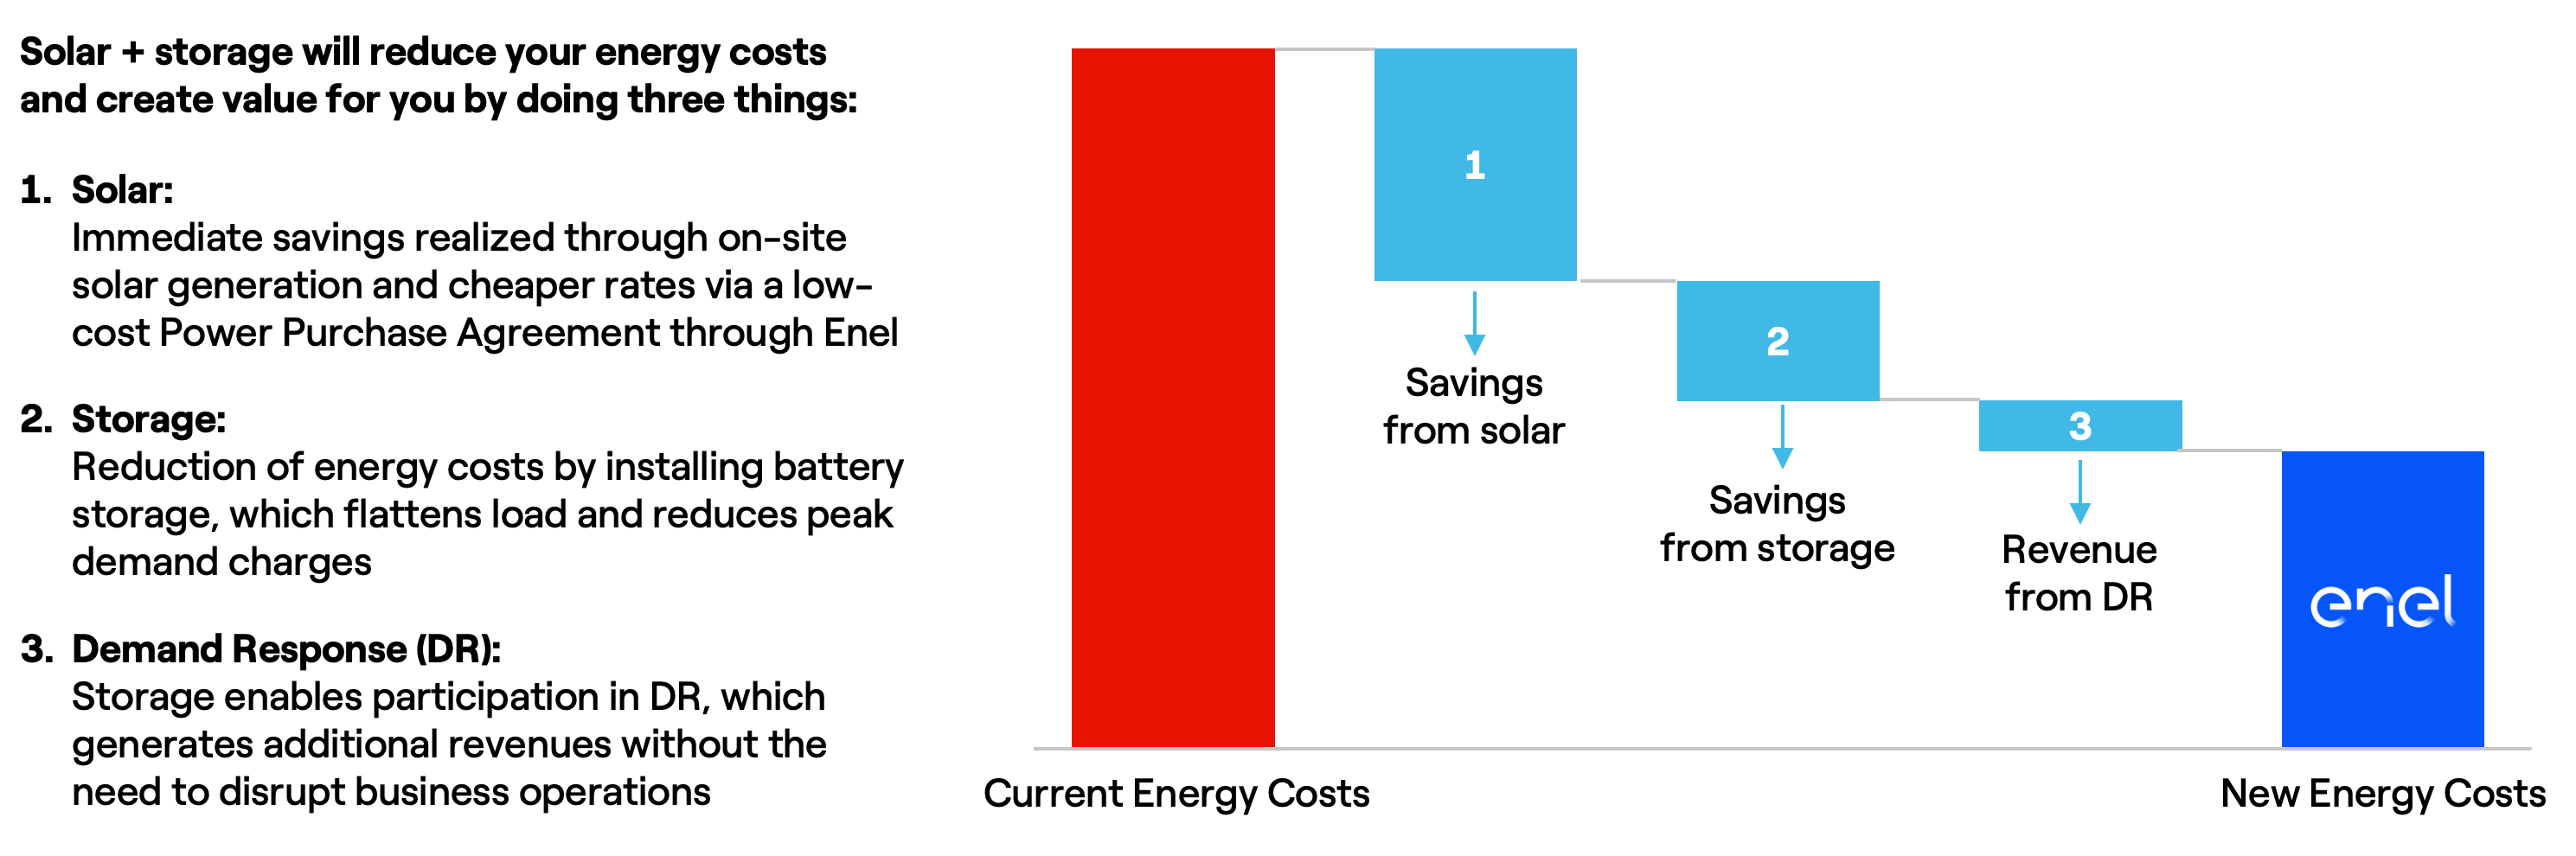 Bar graph showing savings from Solar plus Storage